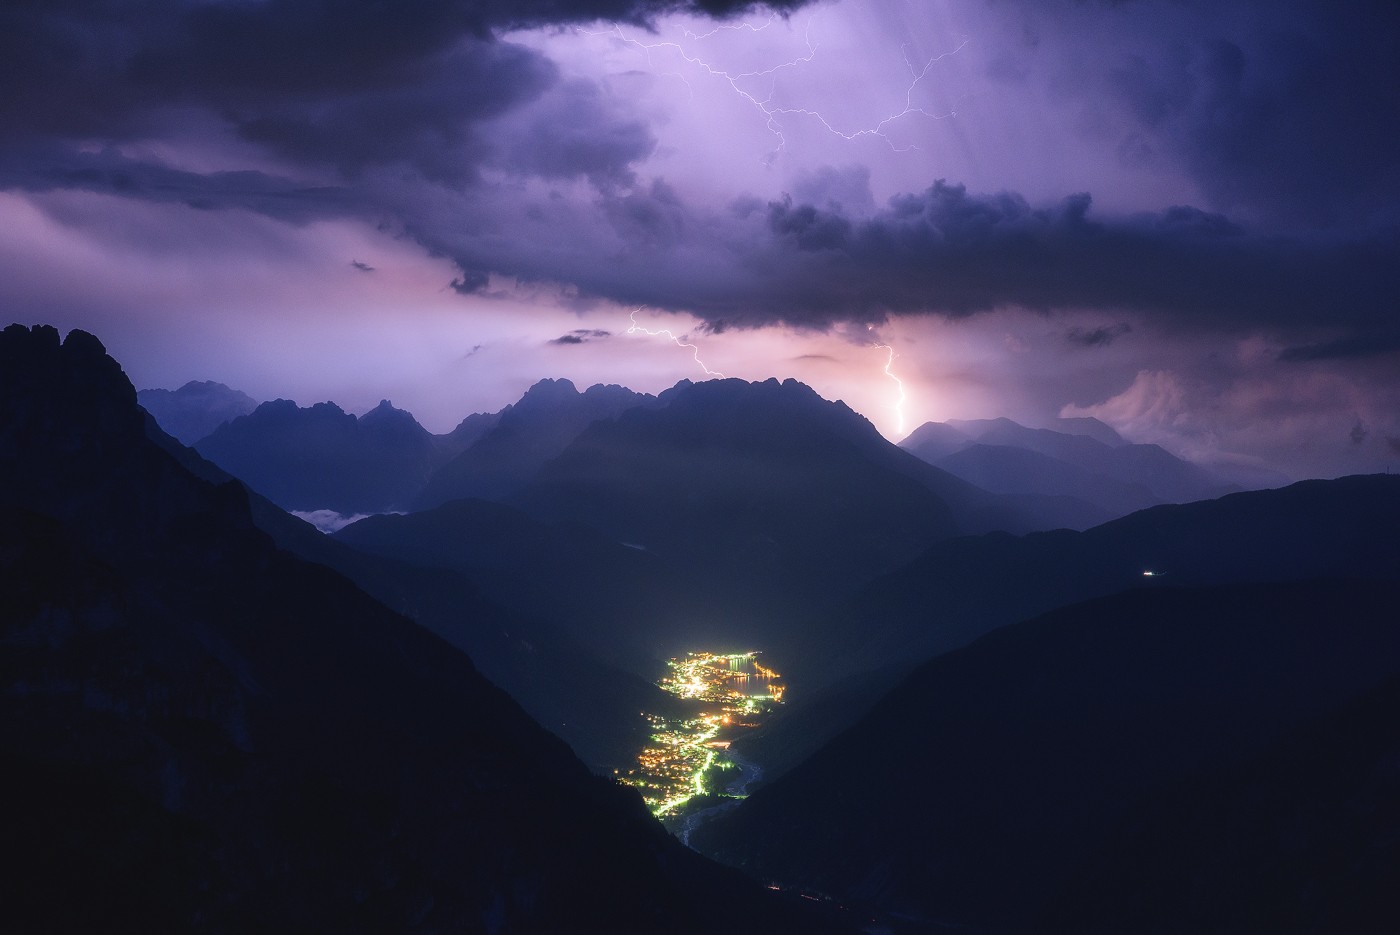 photography, Landscape, Nature, Storm, Lightning, Mountains, Valley, Evening, City, Clouds Wallpaper